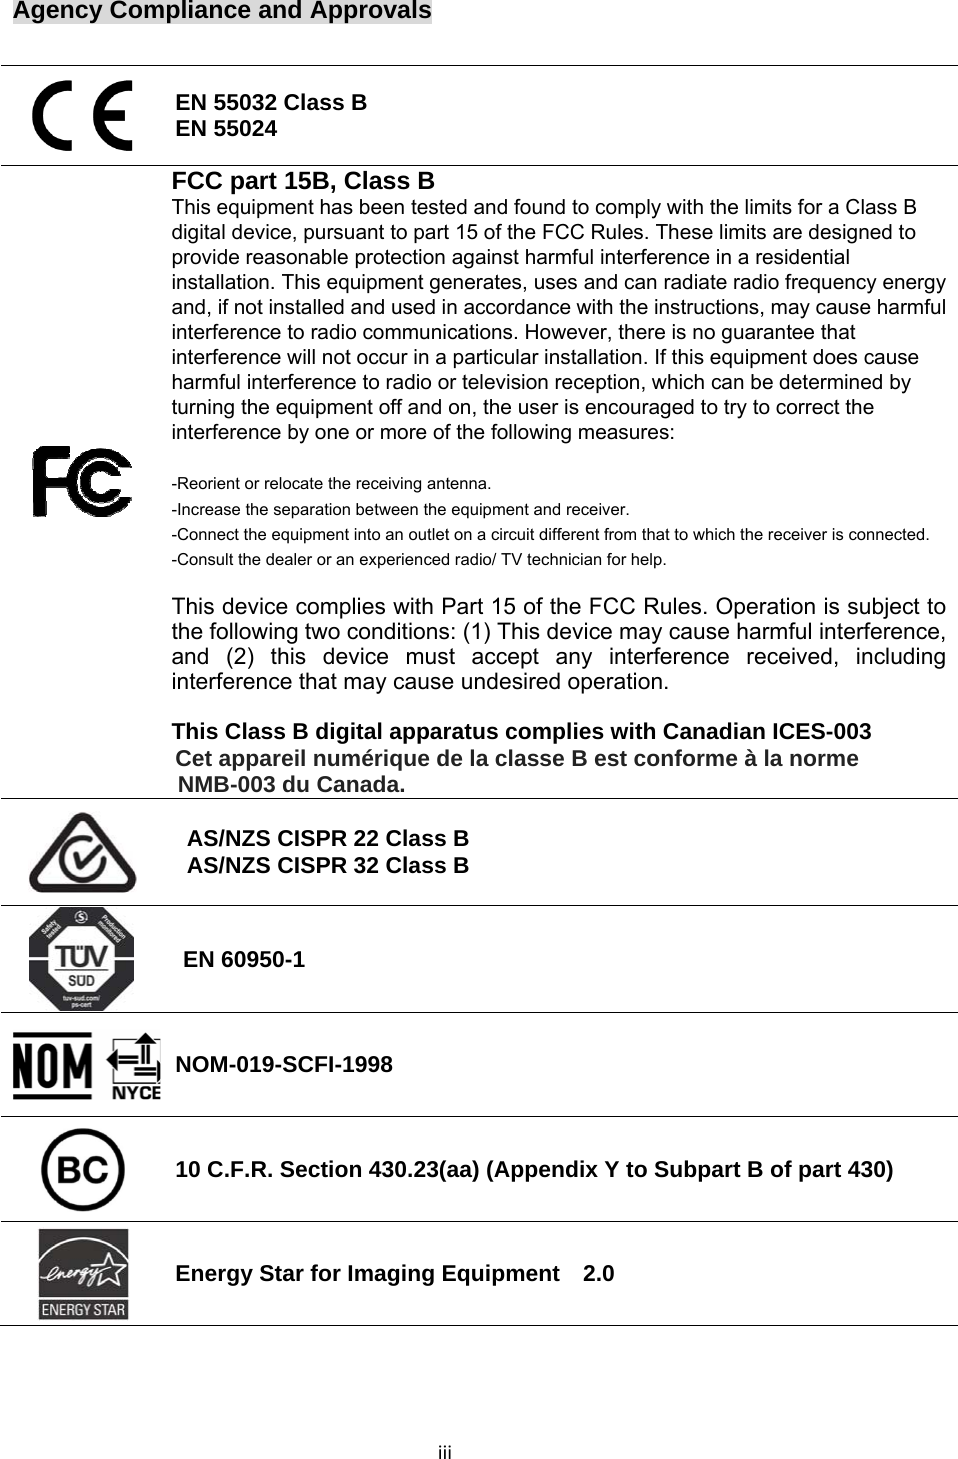 iiiAgency Compliance and Approvals   EN 55032 Class B EN 55024  FCC part 15B, Class B  This equipment has been tested and found to comply with the limits for a Class B digital device, pursuant to part 15 of the FCC Rules. These limits are designed to provide reasonable protection against harmful interference in a residential installation. This equipment generates, uses and can radiate radio frequency energy and, if not installed and used in accordance with the instructions, may cause harmful interference to radio communications. However, there is no guarantee that interference will not occur in a particular installation. If this equipment does cause harmful interference to radio or television reception, which can be determined by turning the equipment off and on, the user is encouraged to try to correct the interference by one or more of the following measures:  -Reorient or relocate the receiving antenna. -Increase the separation between the equipment and receiver. -Connect the equipment into an outlet on a circuit different from that to which the receiver is connected. -Consult the dealer or an experienced radio/ TV technician for help.  This device complies with Part 15 of the FCC Rules. Operation is subject to the following two conditions: (1) This device may cause harmful interference, and (2) this device must accept any interference received, including interference that may cause undesired operation.  This Class B digital apparatus complies with Canadian ICES-003 Cet appareil numérique de la classe B est conforme à la norme NMB-003 du Canada.  AS/NZS CISPR 22 Class B AS/NZS CISPR 32 Class B  EN 60950-1 NOM-019-SCFI-1998  10 C.F.R. Section 430.23(aa) (Appendix Y to Subpart B of part 430)  Energy Star for Imaging Equipment    2.0    